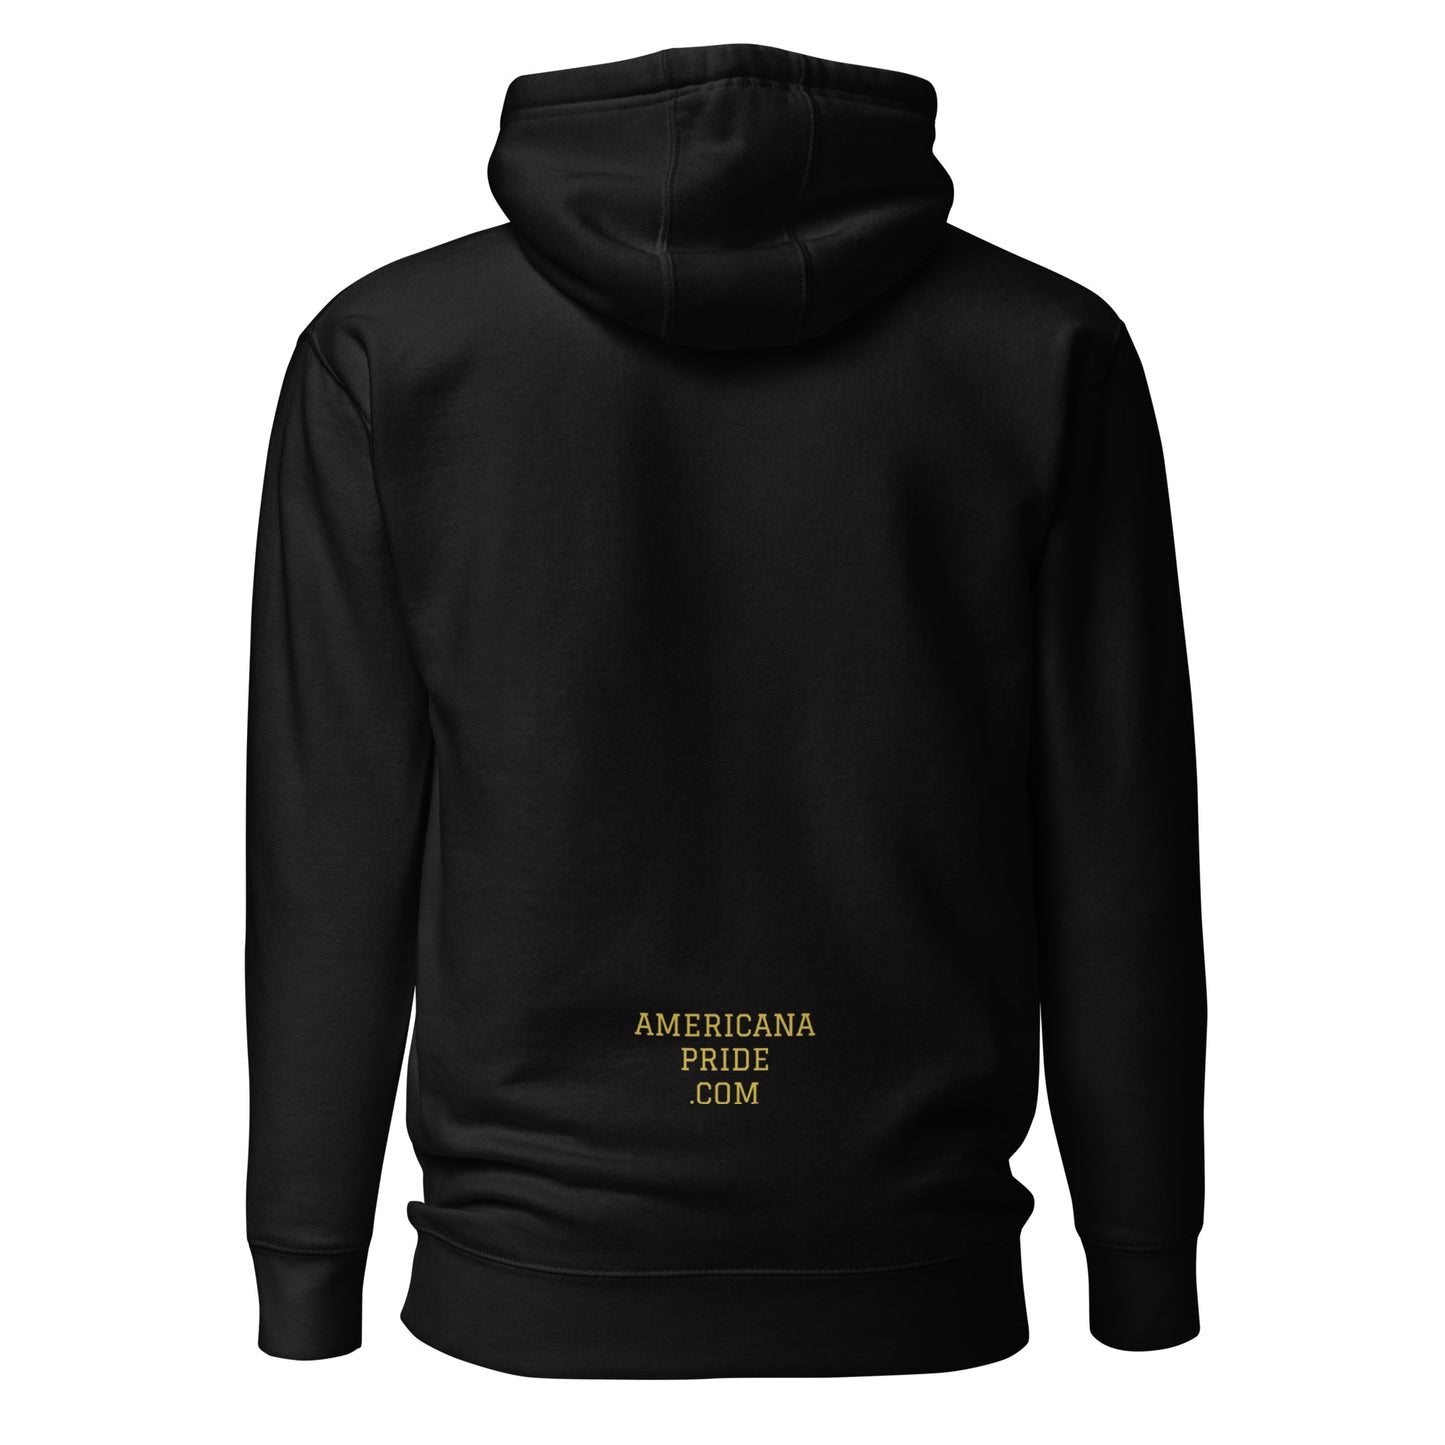 Are you AWAKE? Unisex Hoodie (gold lettering)